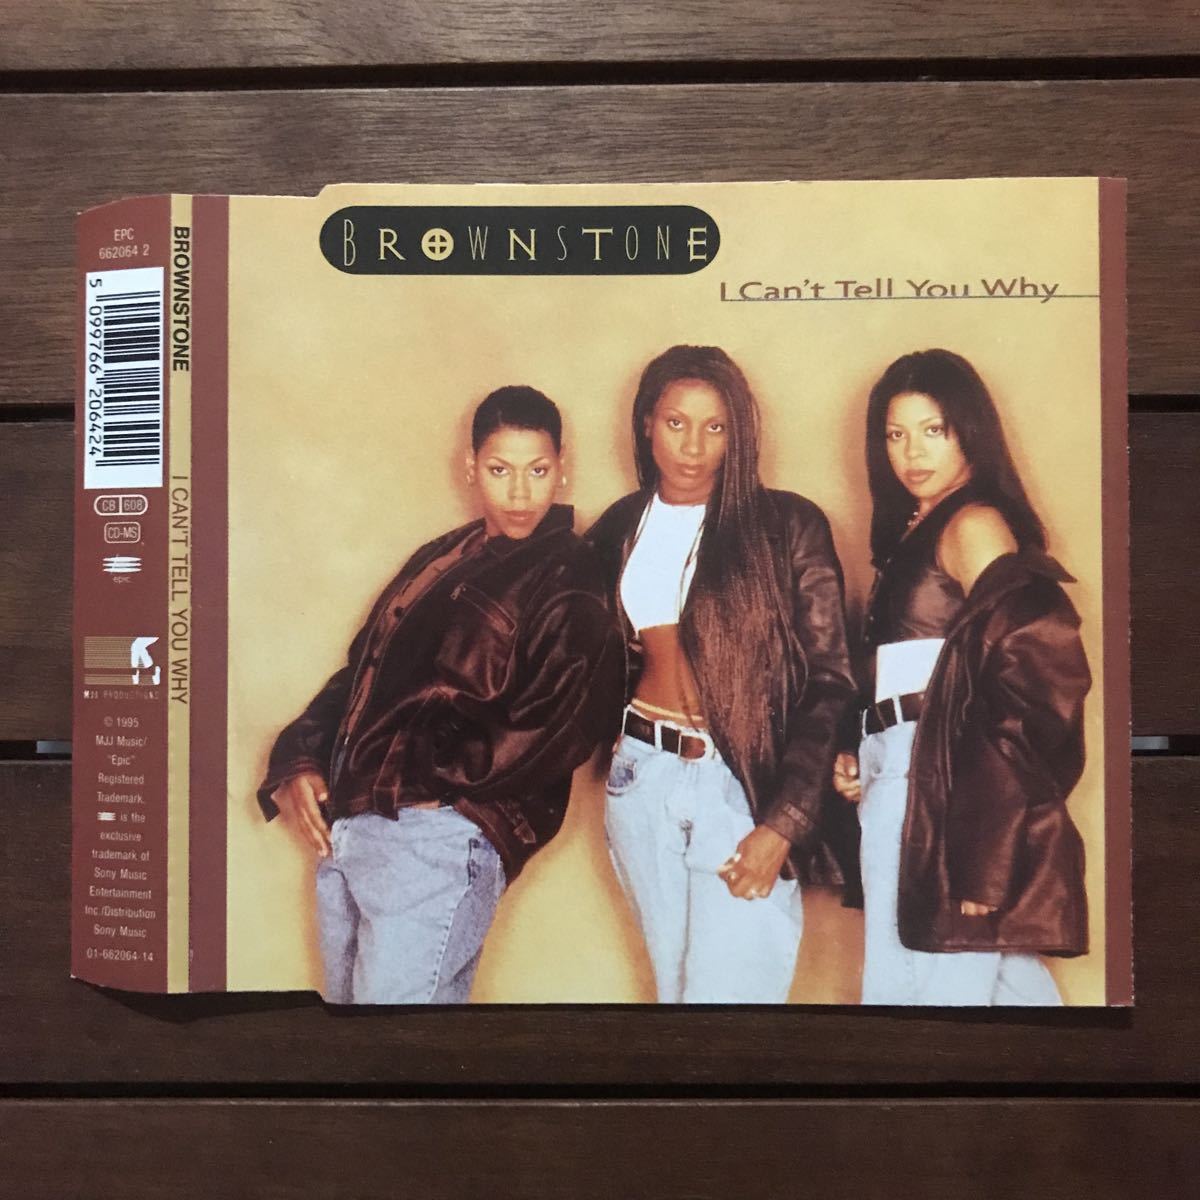 【r&b】Brownstone / I Can't Tell You Why［CDs］《9b036 9595》_画像1